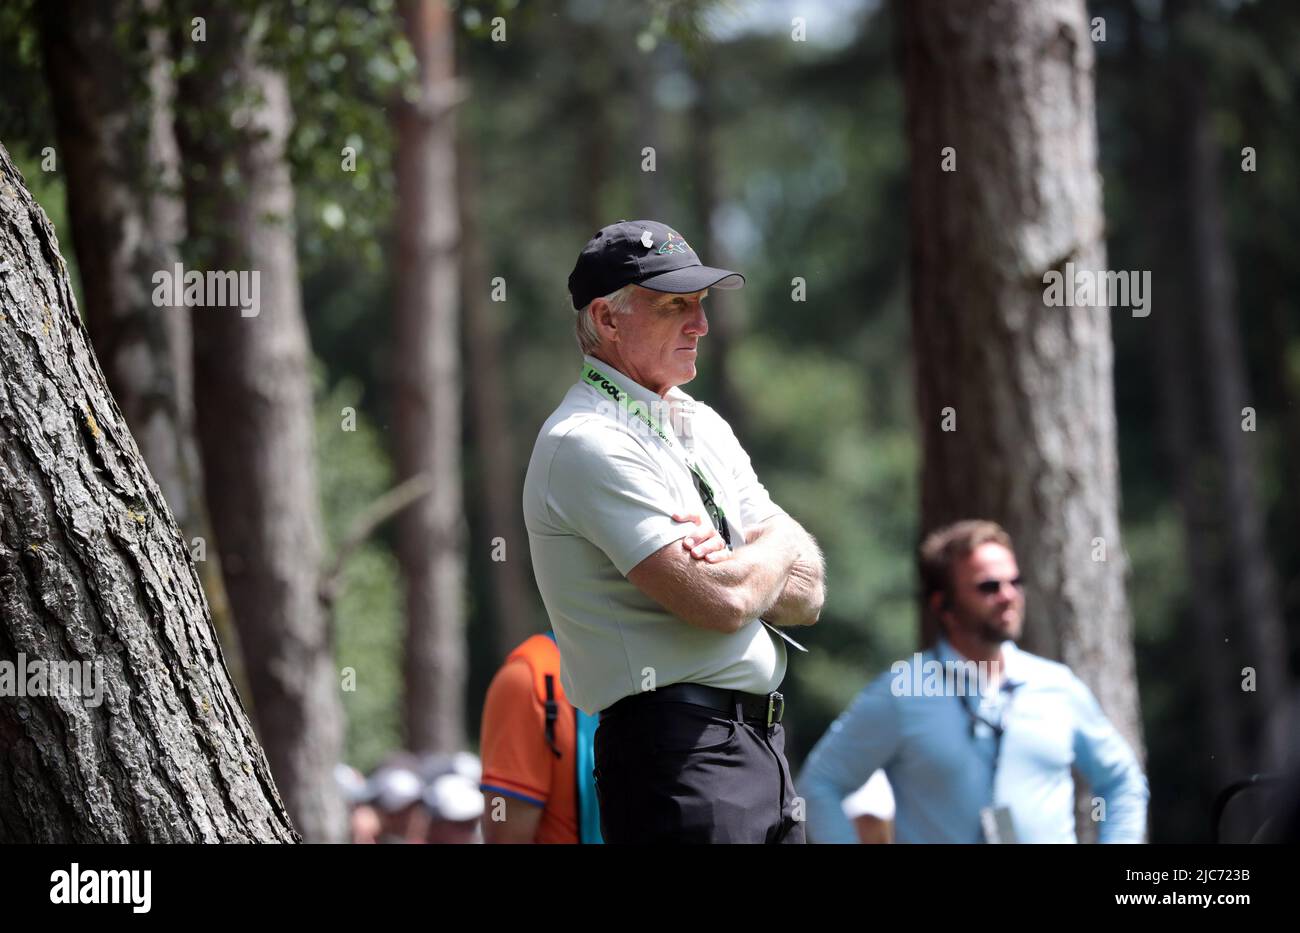 London, UK. 10th June, 2022. CEO of LIV golf Greg Norman watches the action during the second round of the inaugural LIV Golf event at the Centurion club in Hertfordshire on Friday, June 10, 2022.The event is 12 teams of four players competing over 54 holes for a prize pot of $25million dollars to the winning team. Photo by Hugo Philpott/UPI Credit: UPI/Alamy Live News Stock Photo